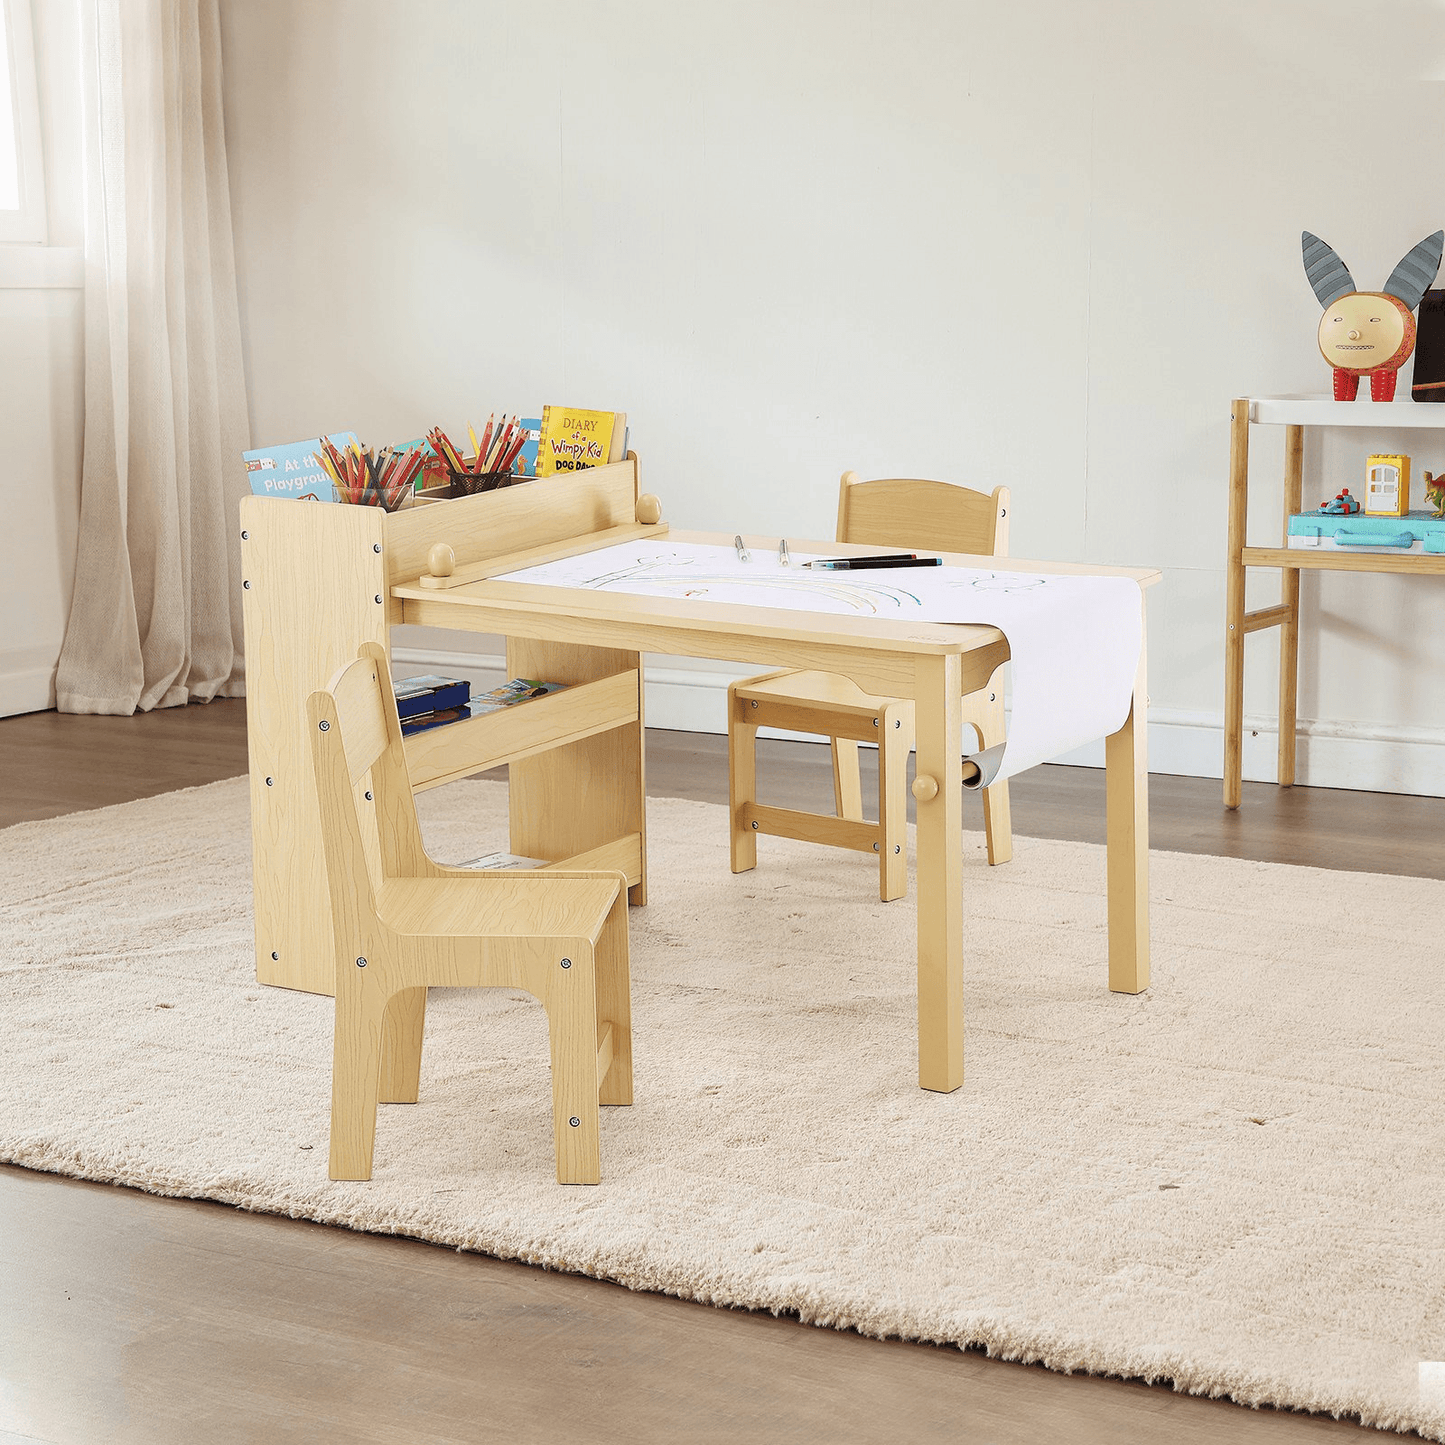 VEVOR Kids Art Table and 2 Chairs, 2-in-1 Toddler Craft and Play Activity Table, Wood Toddler Table and Chair Set with A Cabinet for Art, Craft, Reading, Learning - Loomini